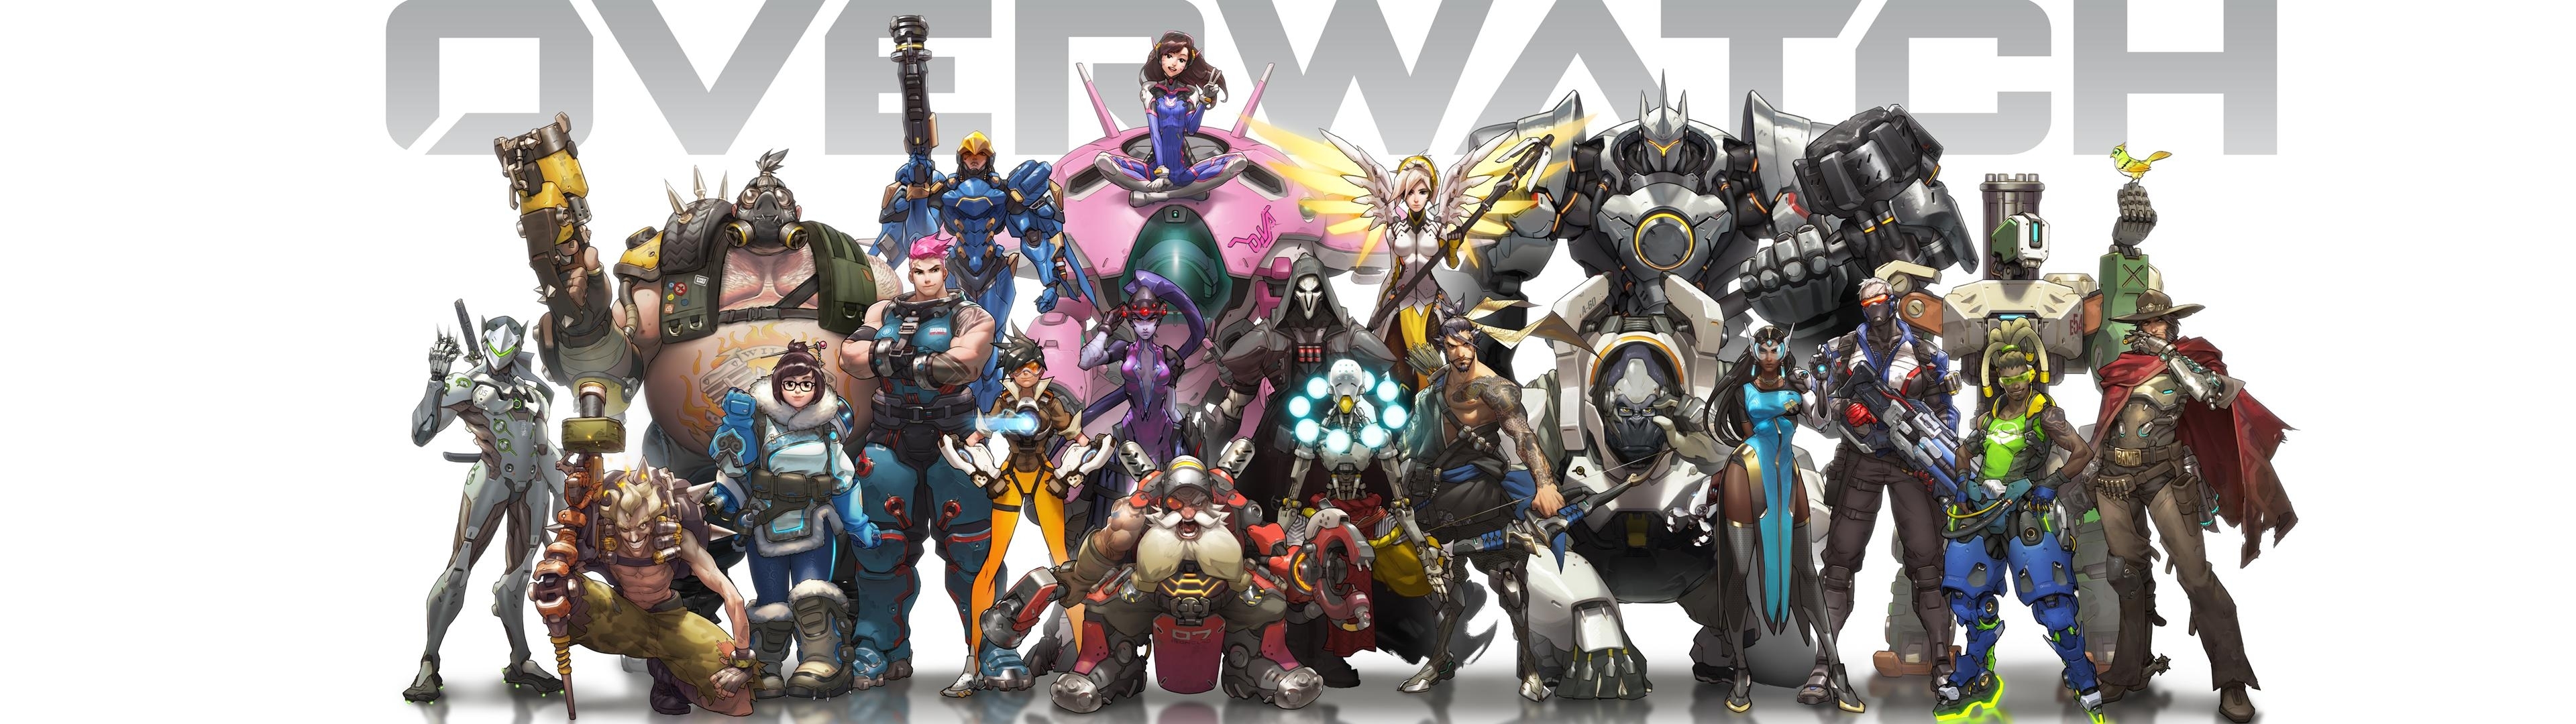 10 New Overwatch Wallpaper Dual Monitor FULL HD 1080p For PC Desktop 2020